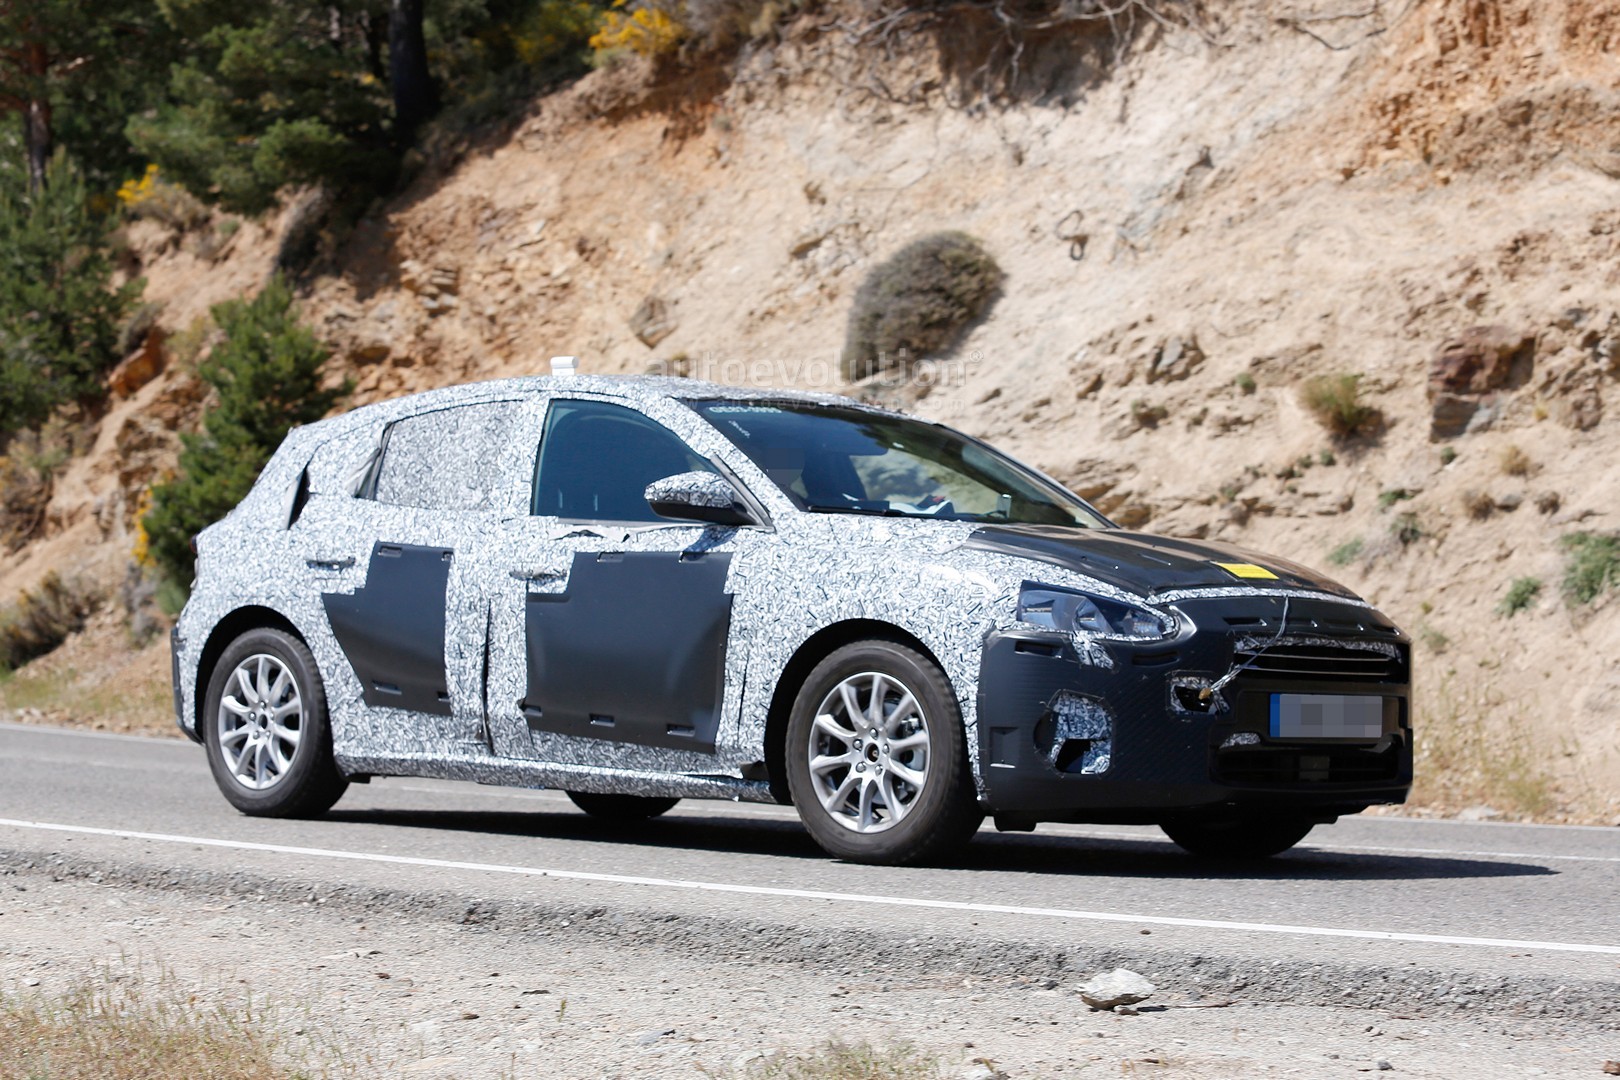 New Ford Focus Hatchback Spied In Spain Engineers Are